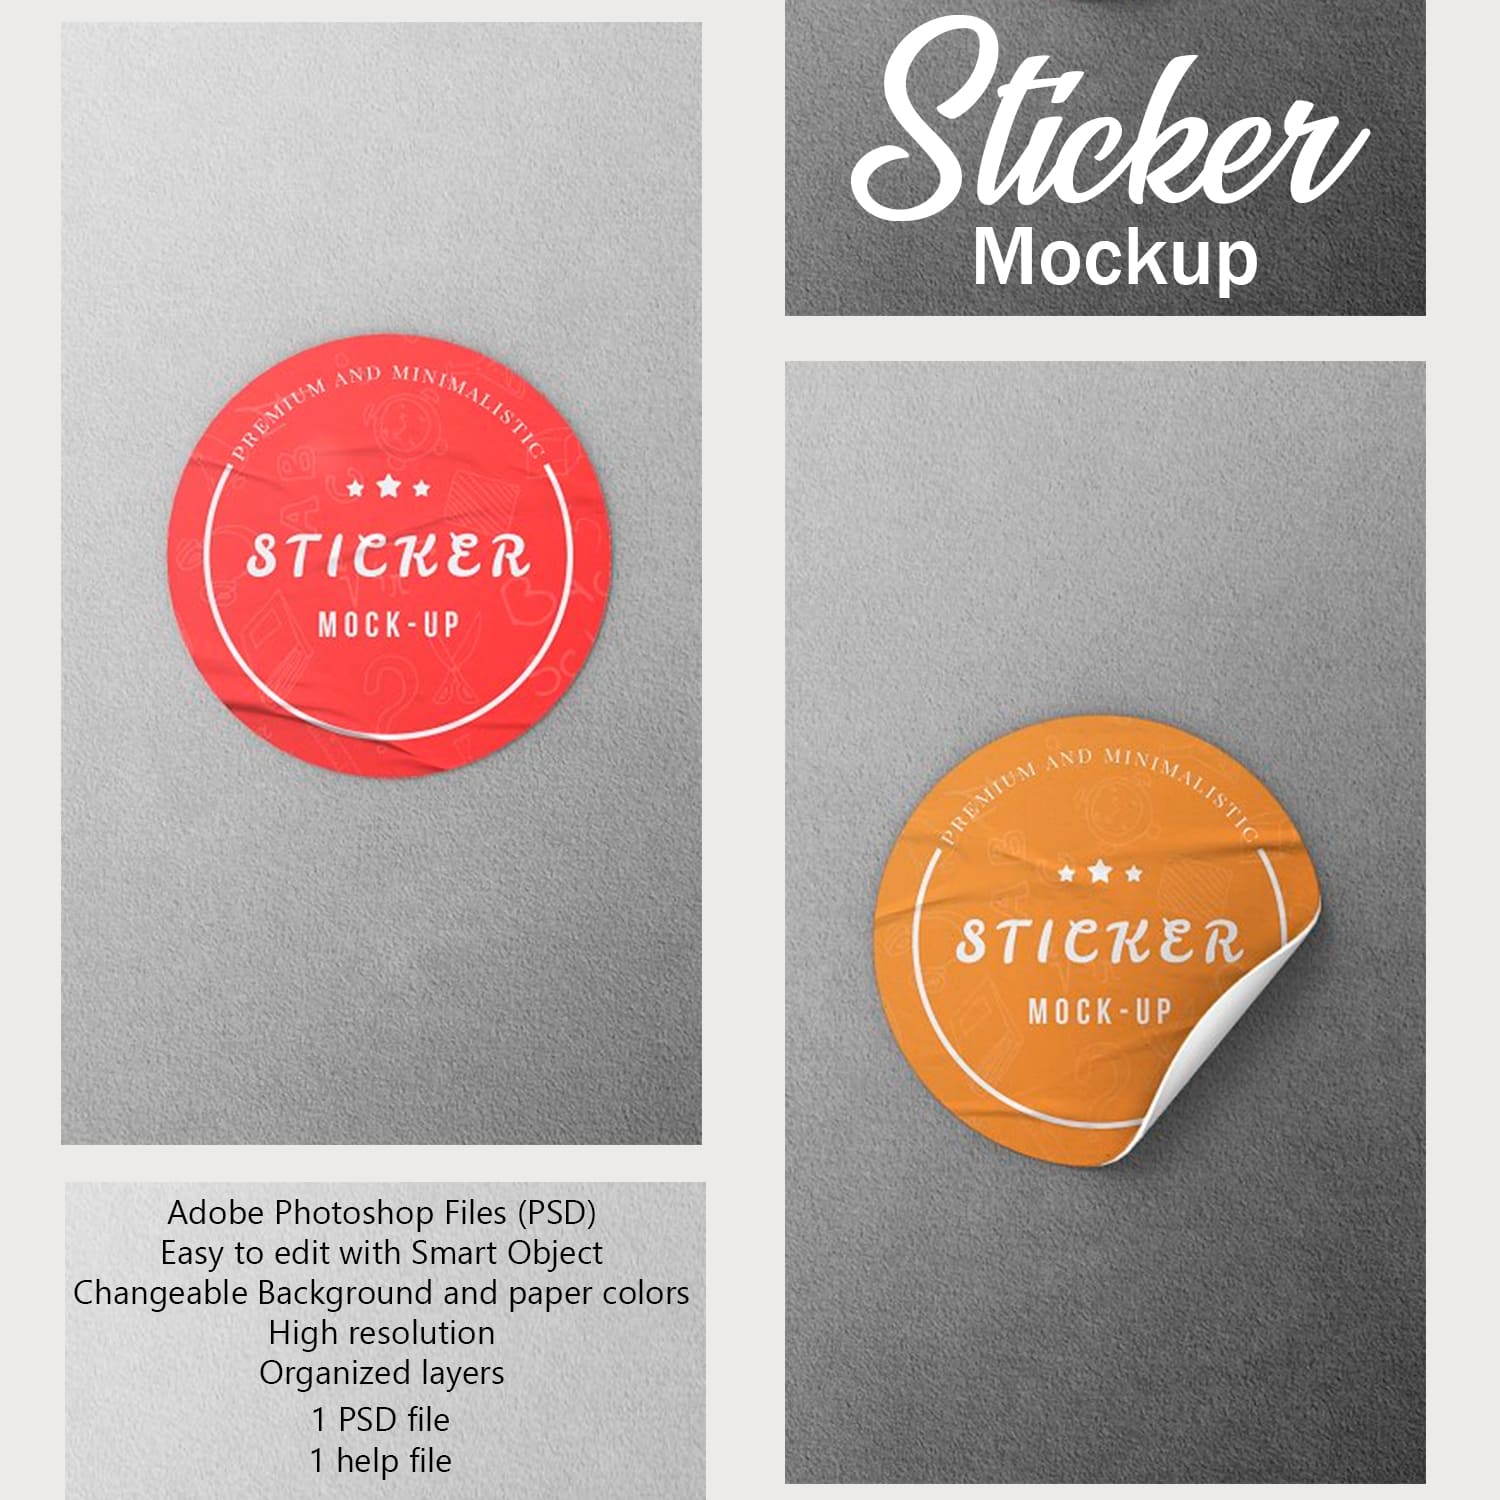 Images of adorable red and orange stickers.